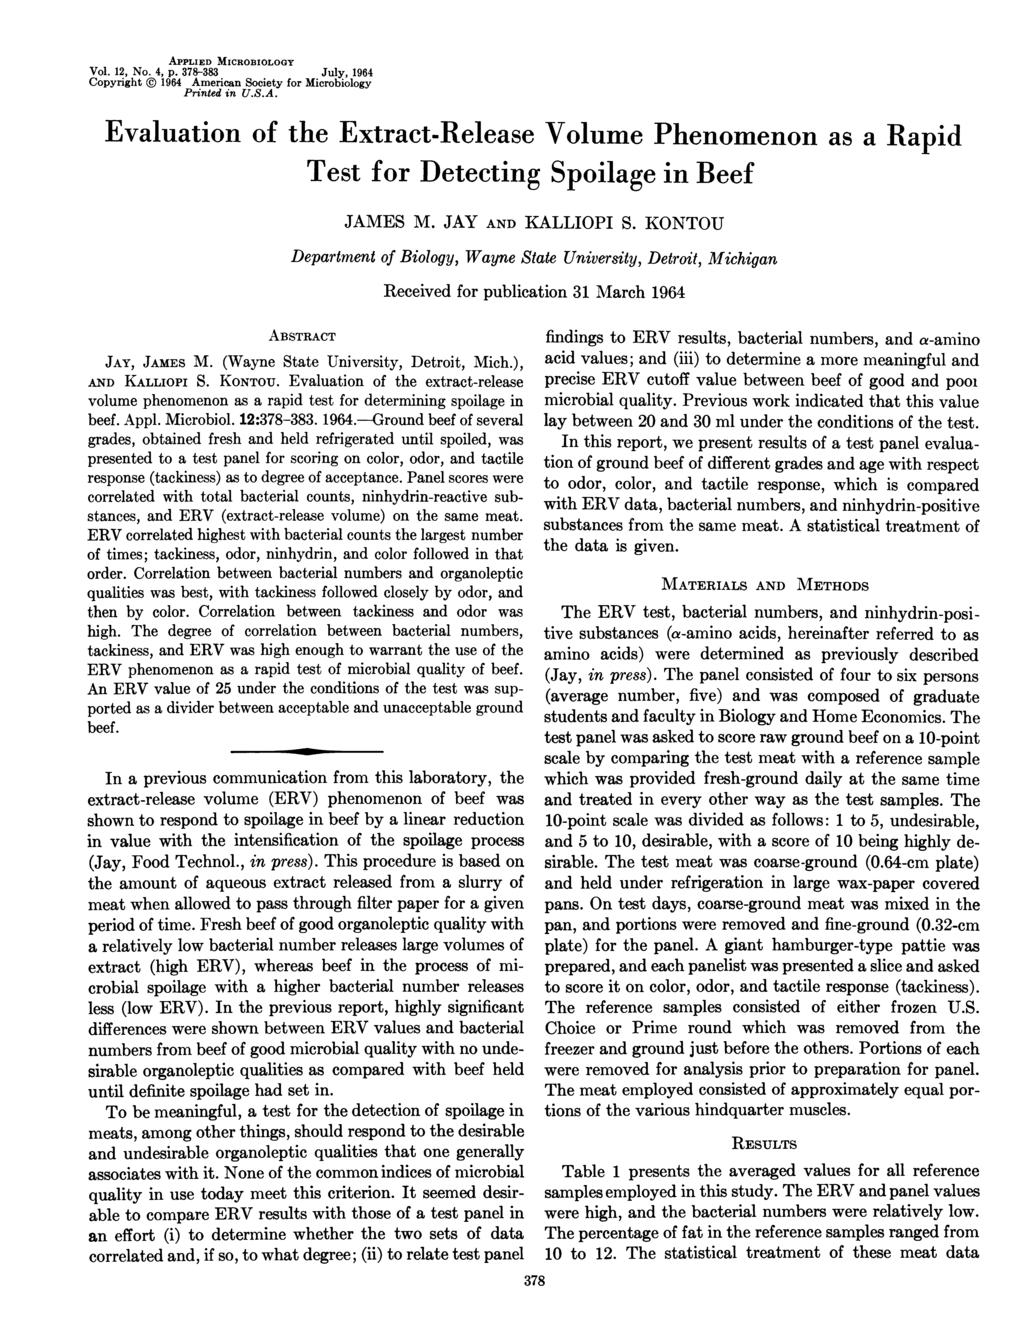 APPLIED MICROBIOLOGY Vol. 12, No. 4, p. 378-383 July, 1964 Copyright 1964 American Society for Microbiology Printed in U.S.A. Evaluation of the Extract-Release Volume Phenomenon as a Rapid Test for Detecting Spoilage in Beef JAMES M.